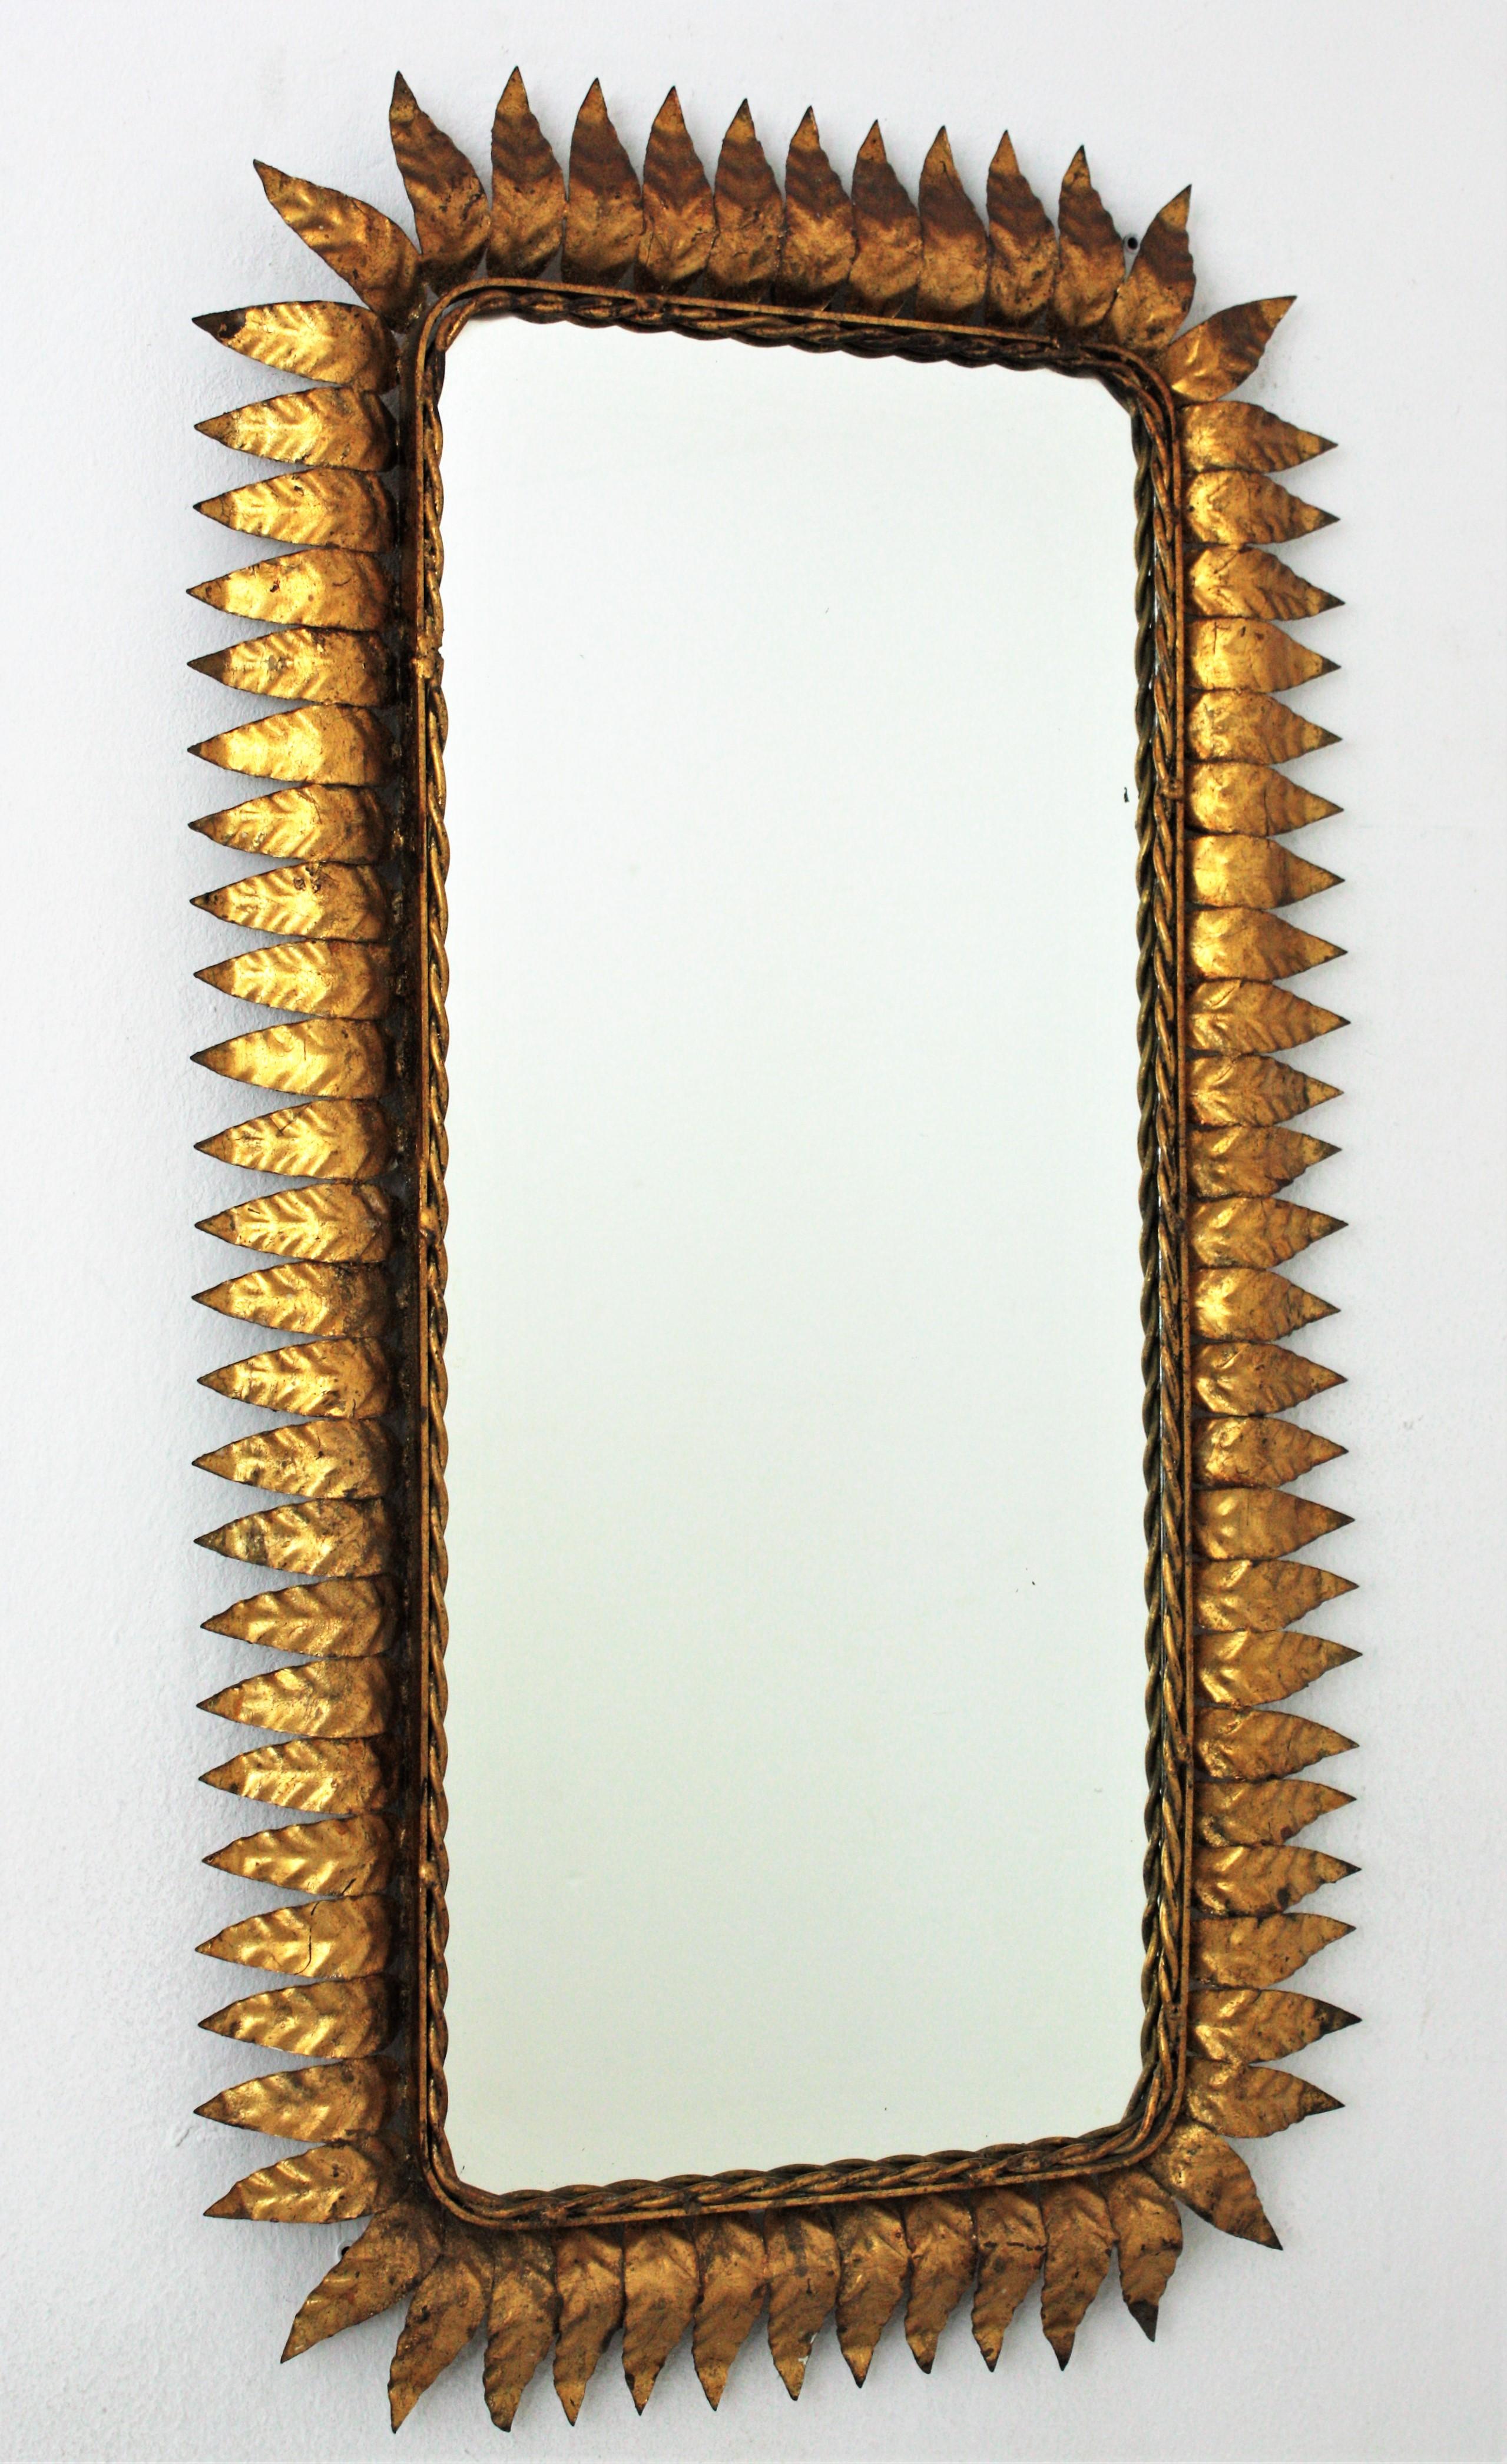 Hand-hammered iron sunburst rectangular wall mirror with gold leaf finish, Spain, 1950s.
Its highly decorative rectangular leafed frame with gold leaf gilding and its large glass surface makes this piece very interesting. 
A great choice placed in